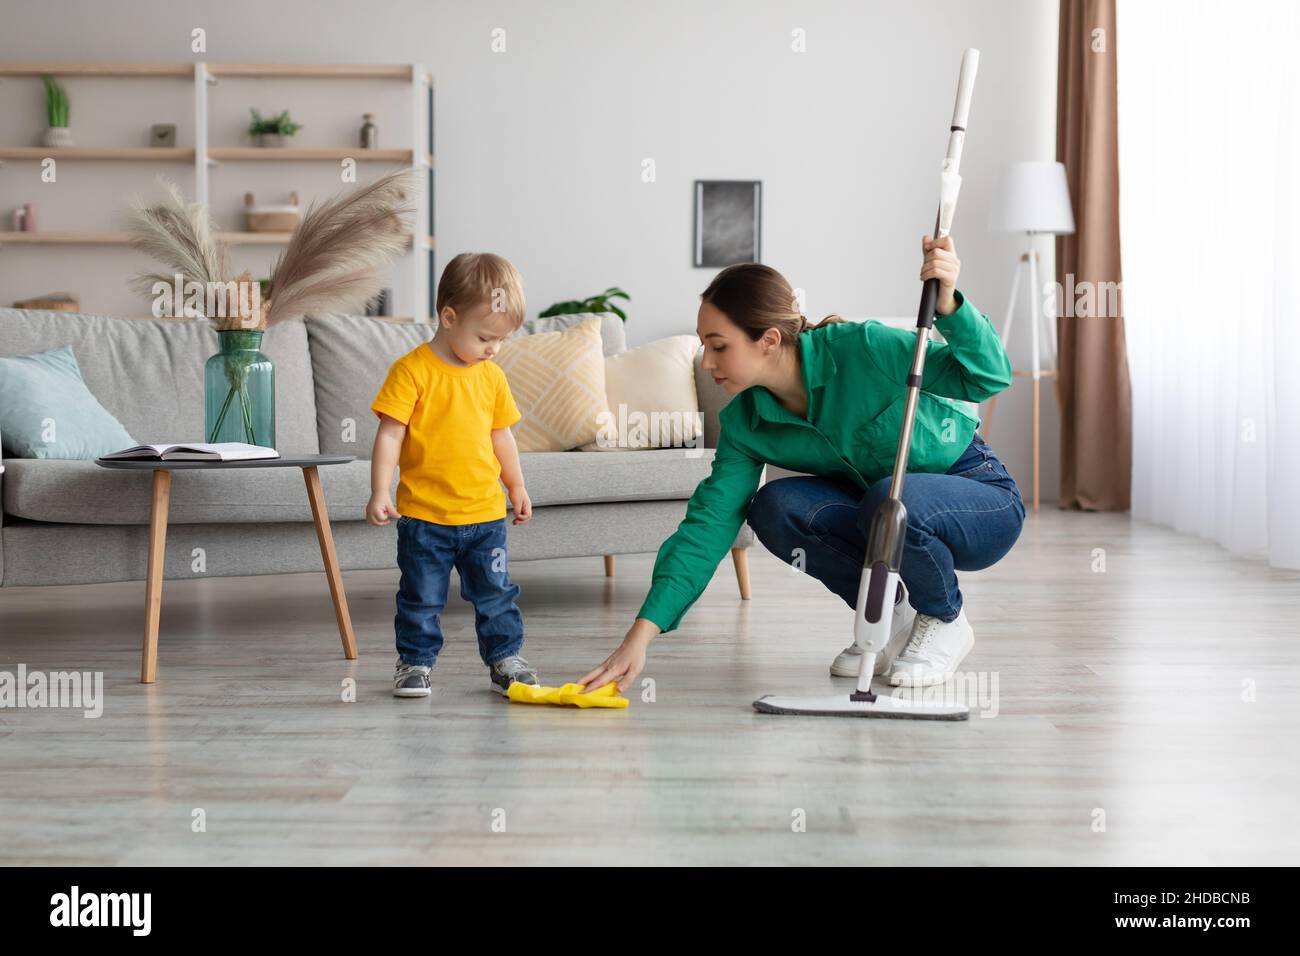 Little kid boy watching her mother mopping the floor after him. Woman wiping the floor with rag next to her baby Stock Photo